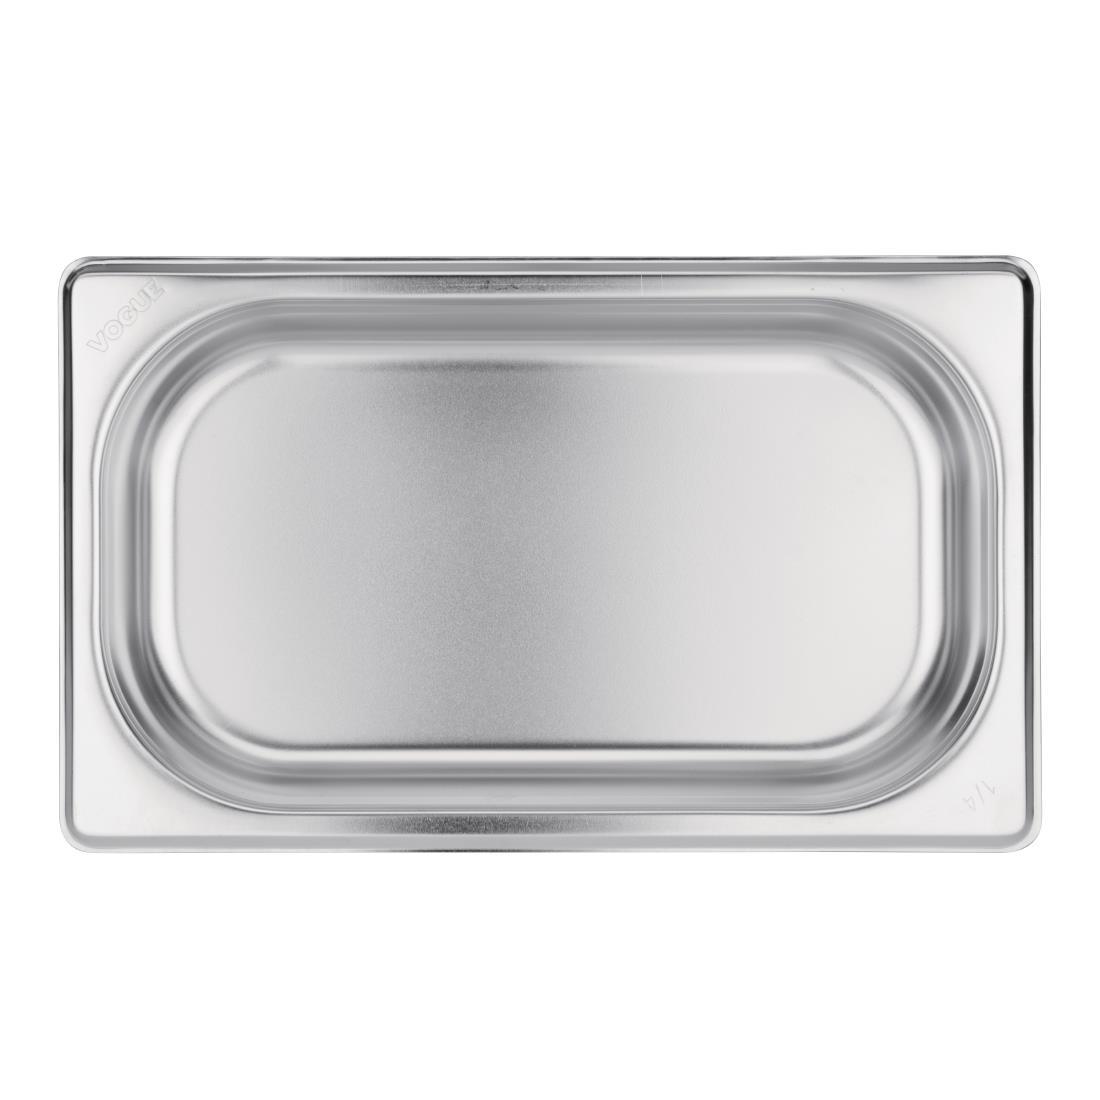 Vogue Stainless Steel 1/4 Gastronorm Pan 40mm - GM313  - 3